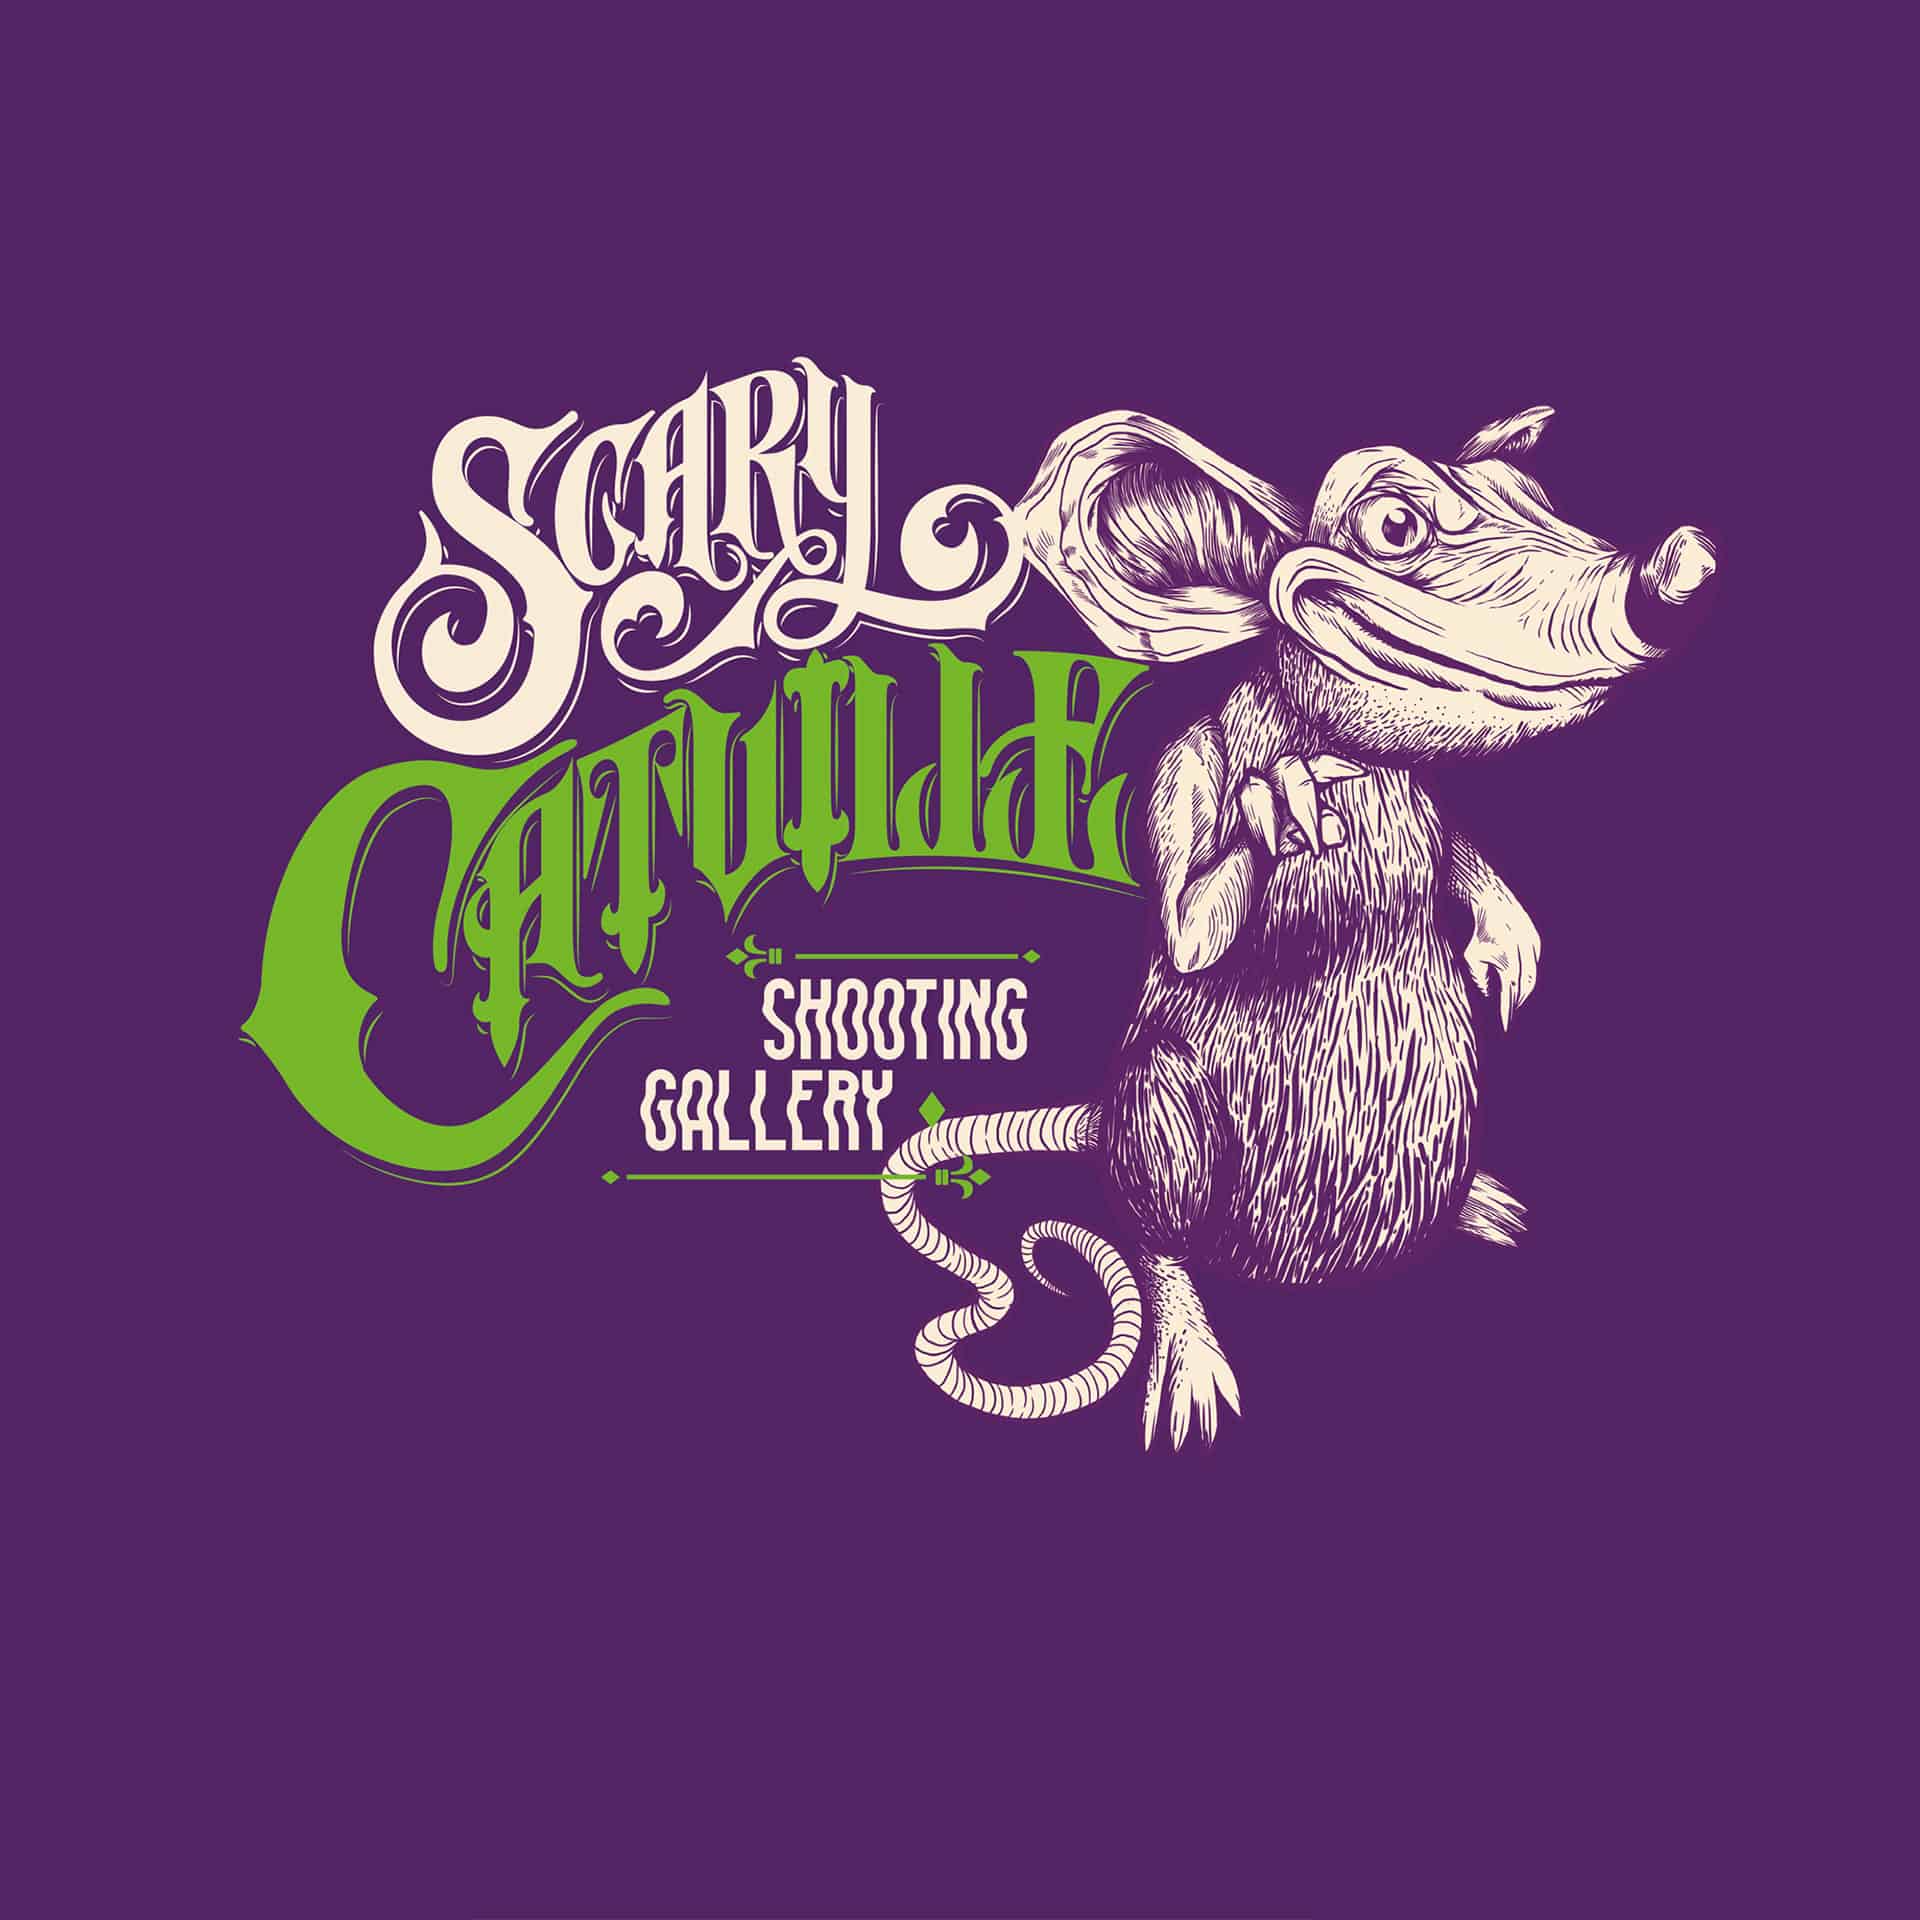 Scary Catville